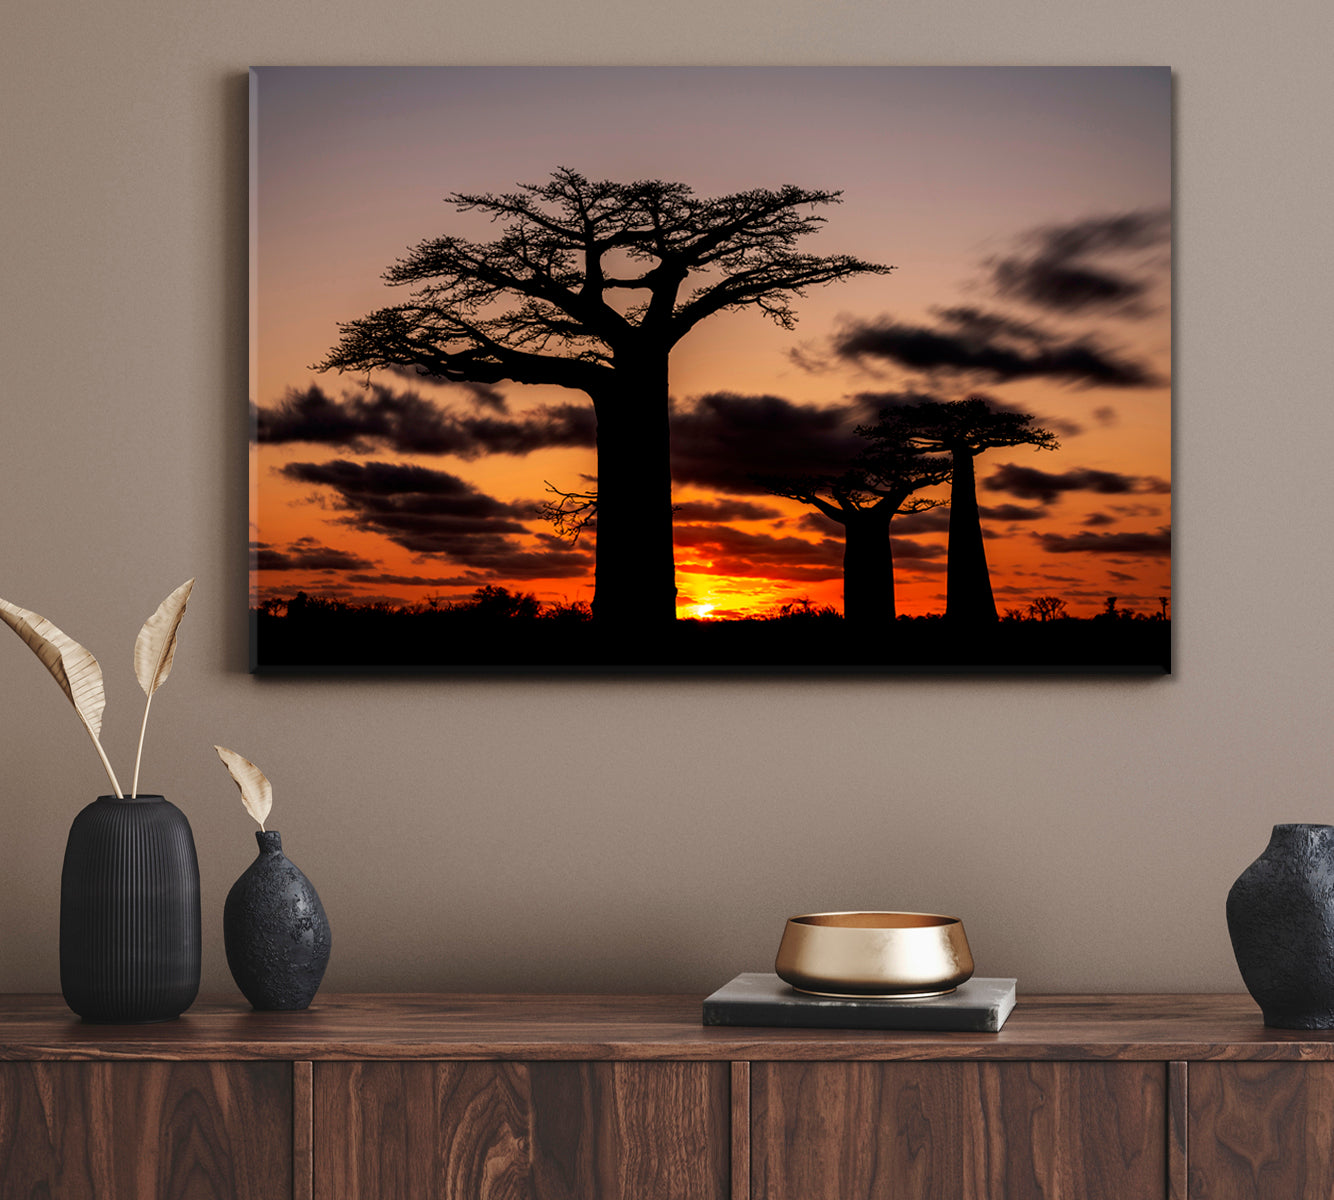 African Landscape Night View Huge Baobabs Nature Wall Canvas Print Artesty 1 panel 24" x 16" 